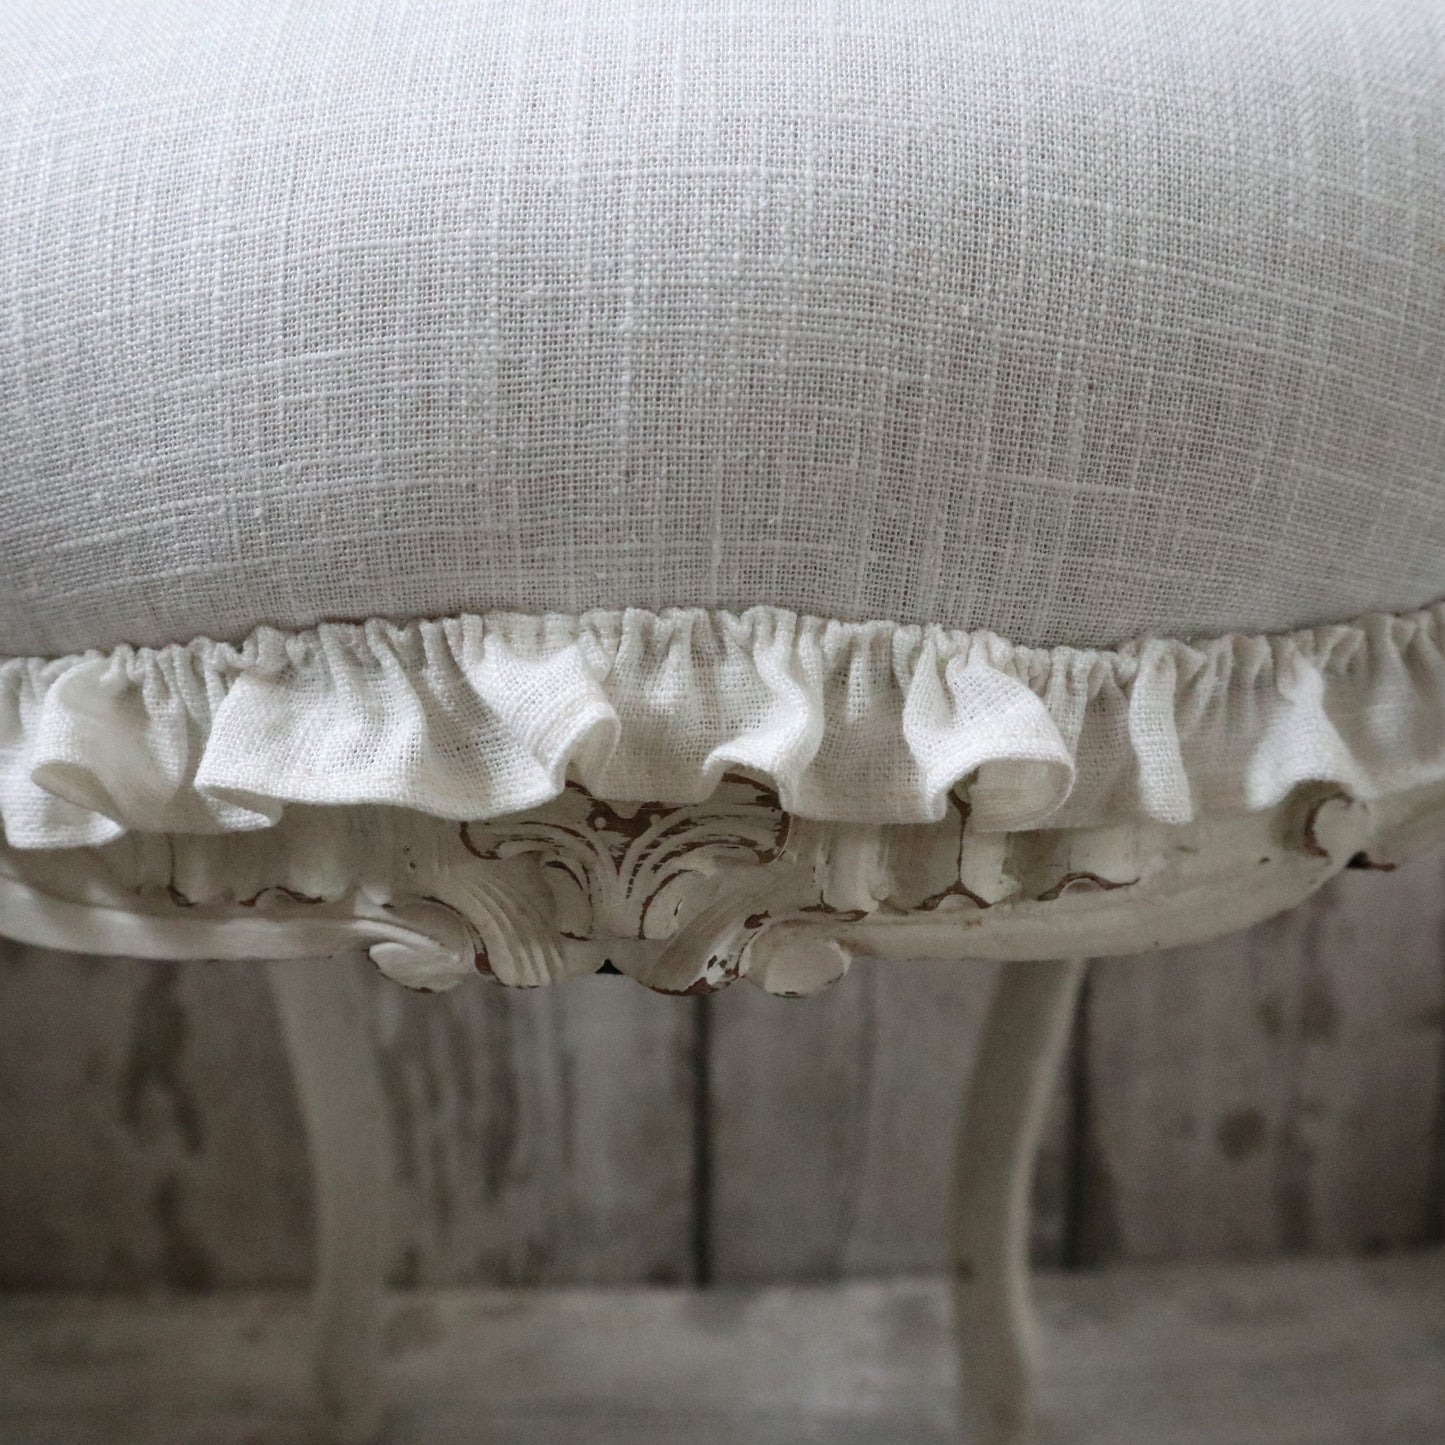 Vintage Painted Rococo Salon Chair with Ruffle Trim